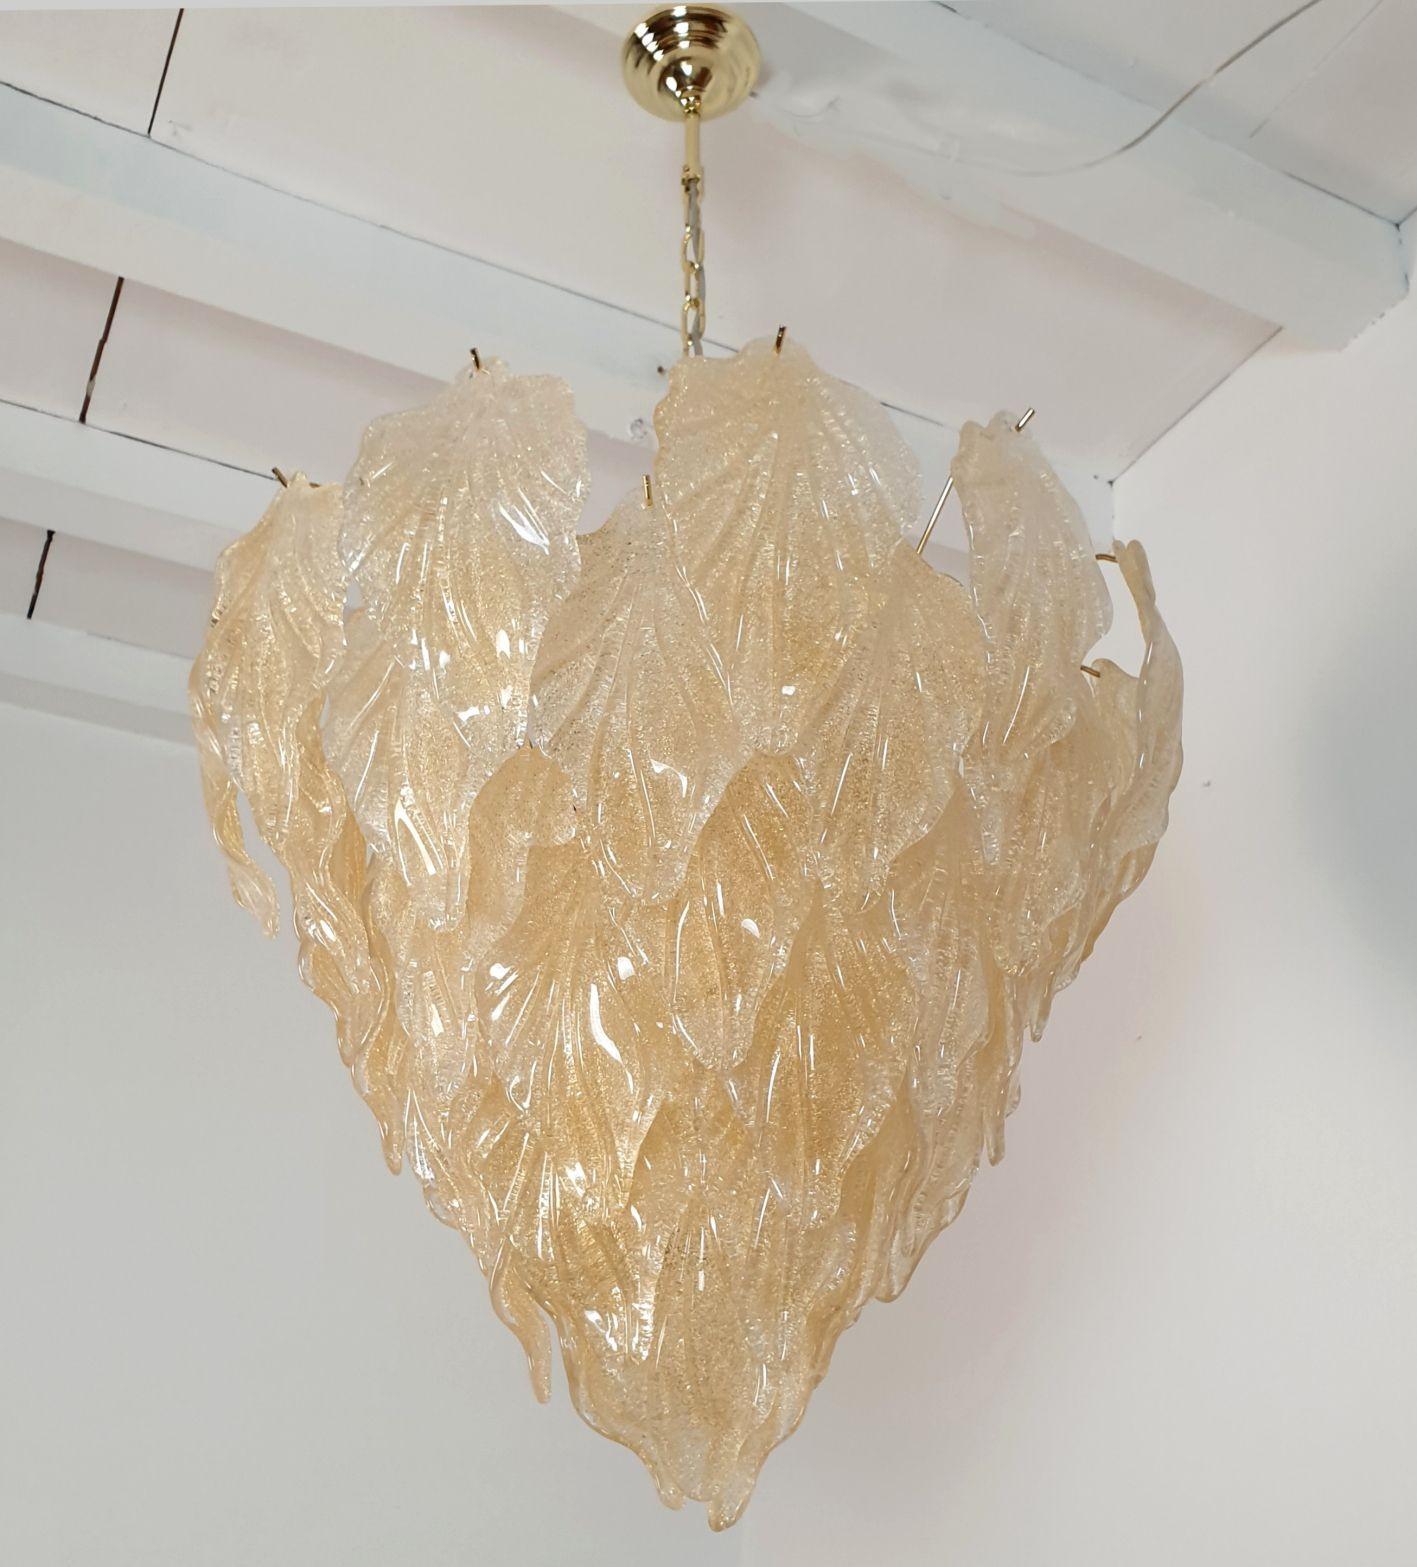 Murano glass chandelier, Mid Century Modern, attributed to Barovier and Toso, Italy 1980s.
The chandelier is made of translucent Graniglia ( glass sand inside the glass leaf) leaves in Murano glass and a gold plated frame.
The Murano glass leaves